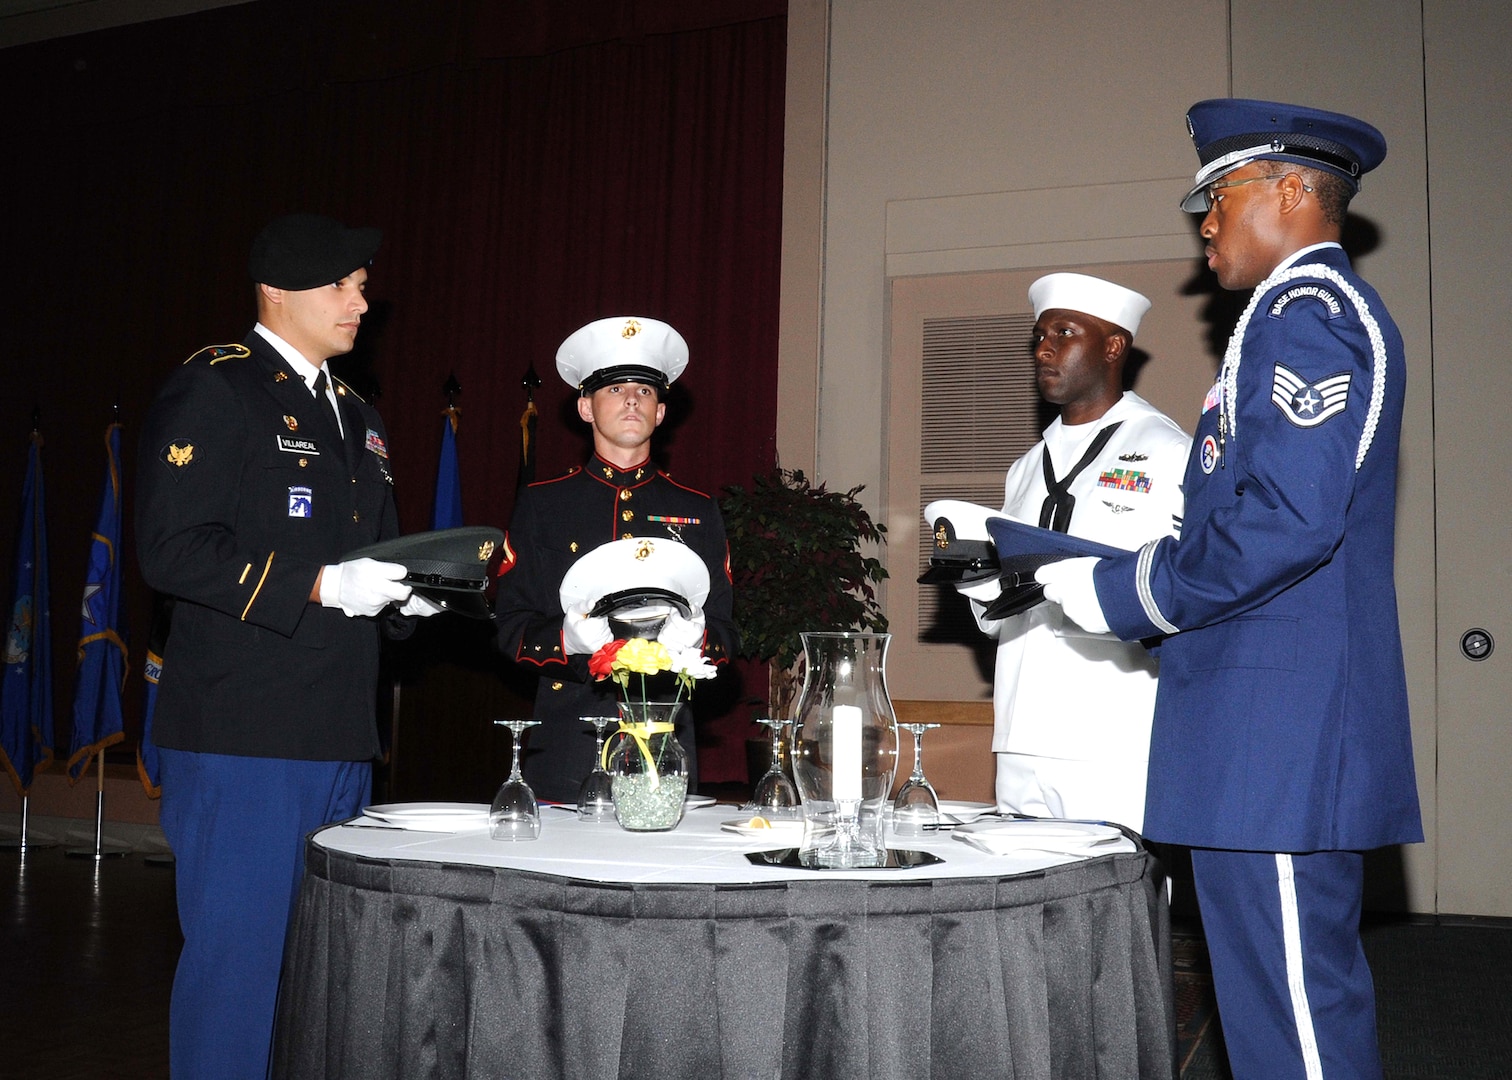 Servicemembers place one hat from each service branch on the Prisoner of War/Missing in Action table during the 502nd Air Base Wing Air Force Ball Sept. 24 at the Gateway Club. The POW/MIA table symbolizes those lost in combat who could not share in the celebration. (U.S. Air Force photo/Alan Boedeker) 